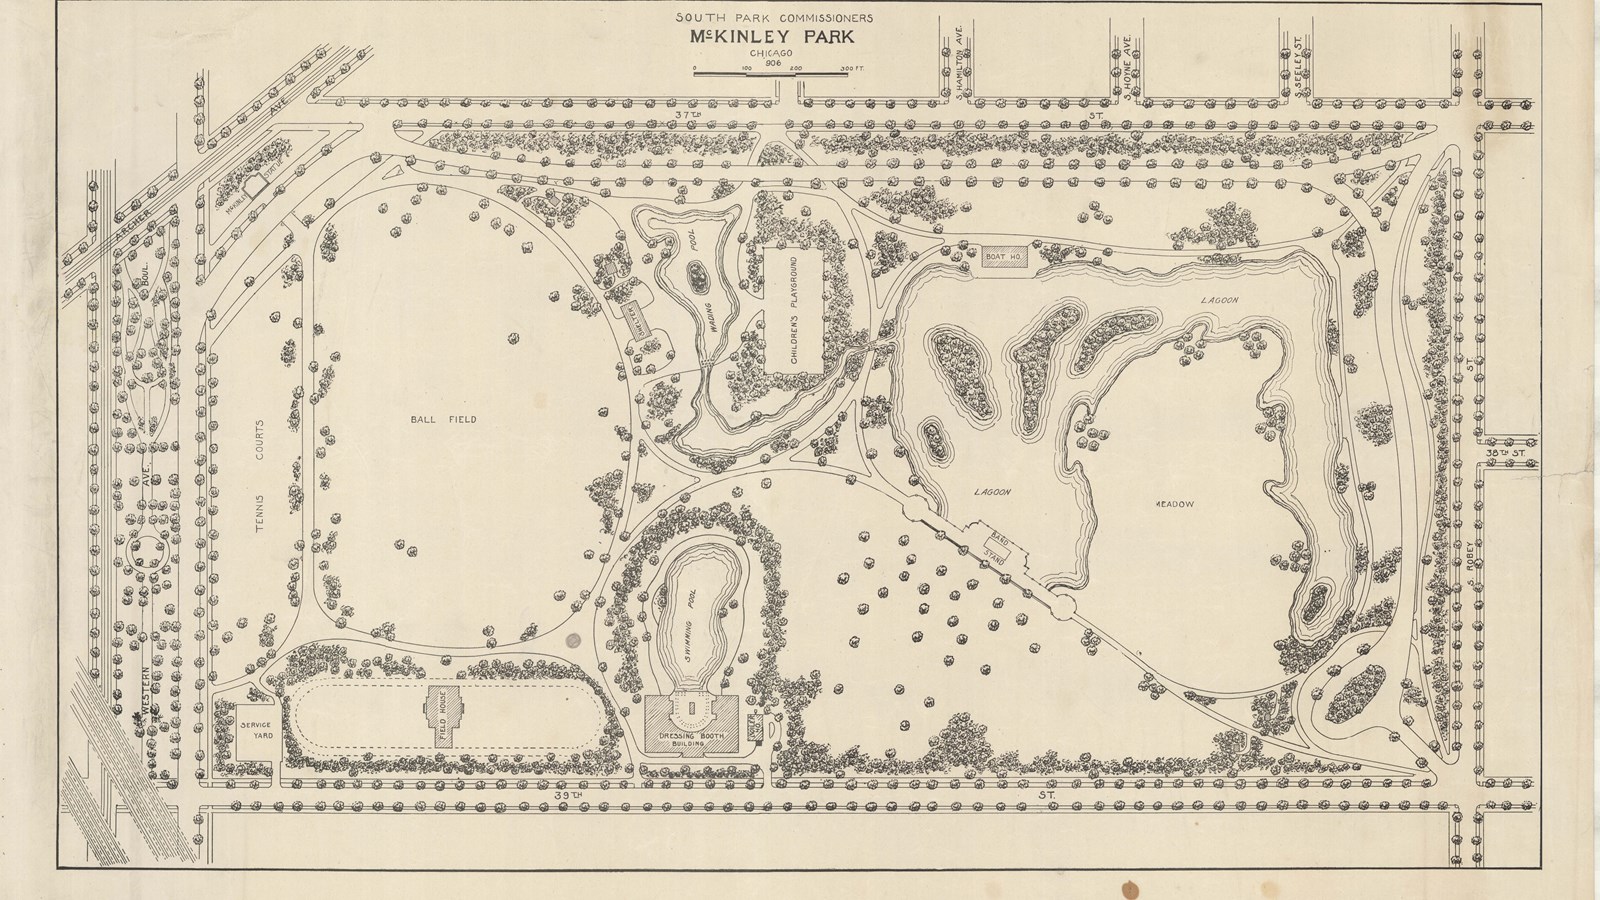 Plan of rectangular park with lagoon, ballfield, and curving paths lined with trees